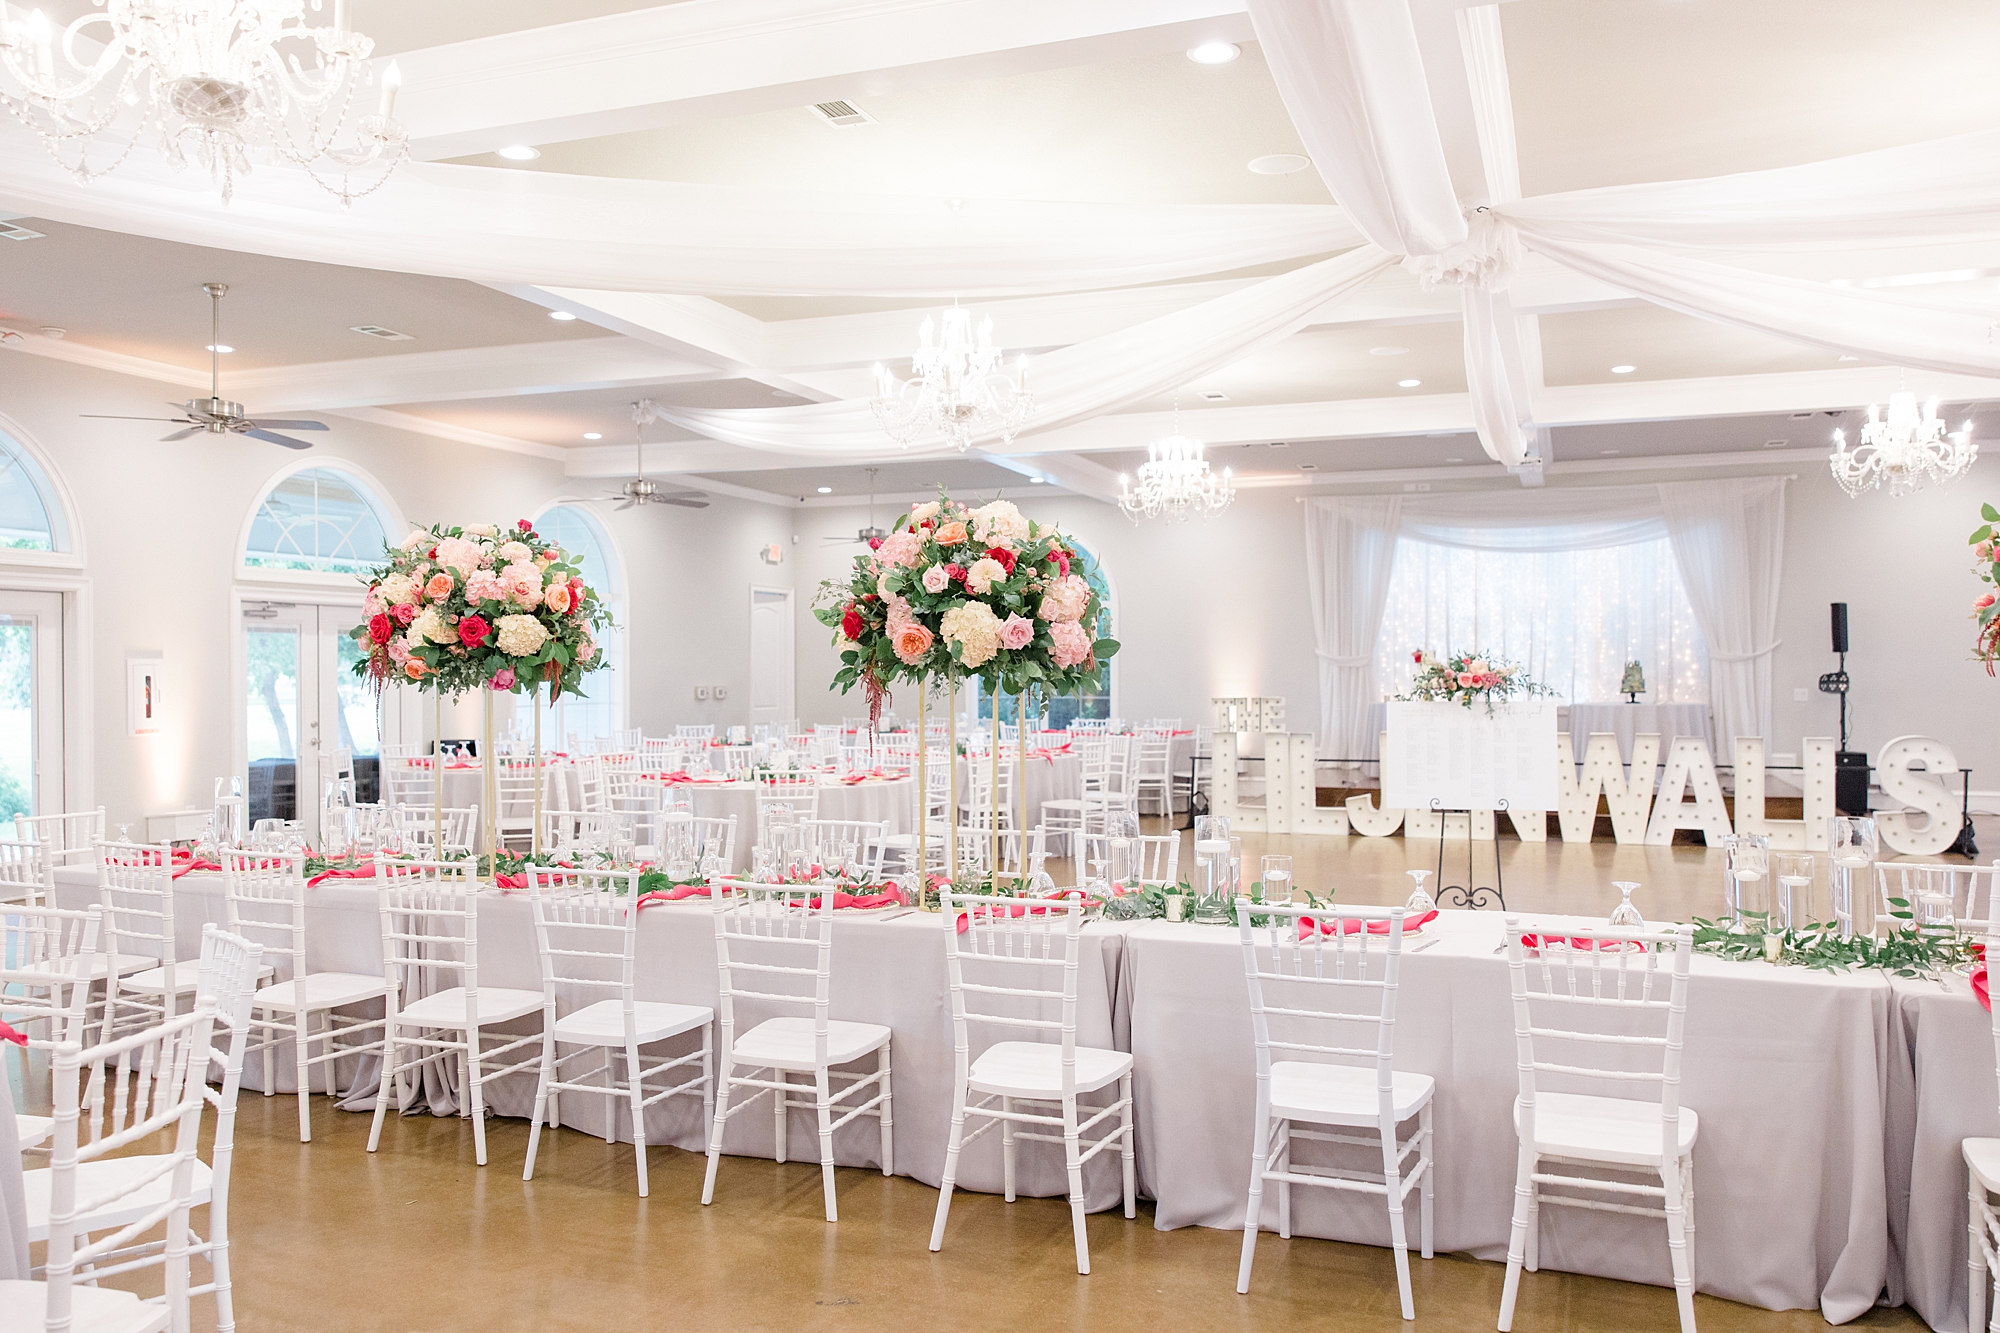 pink and white decor for Willow Creek wedding reception